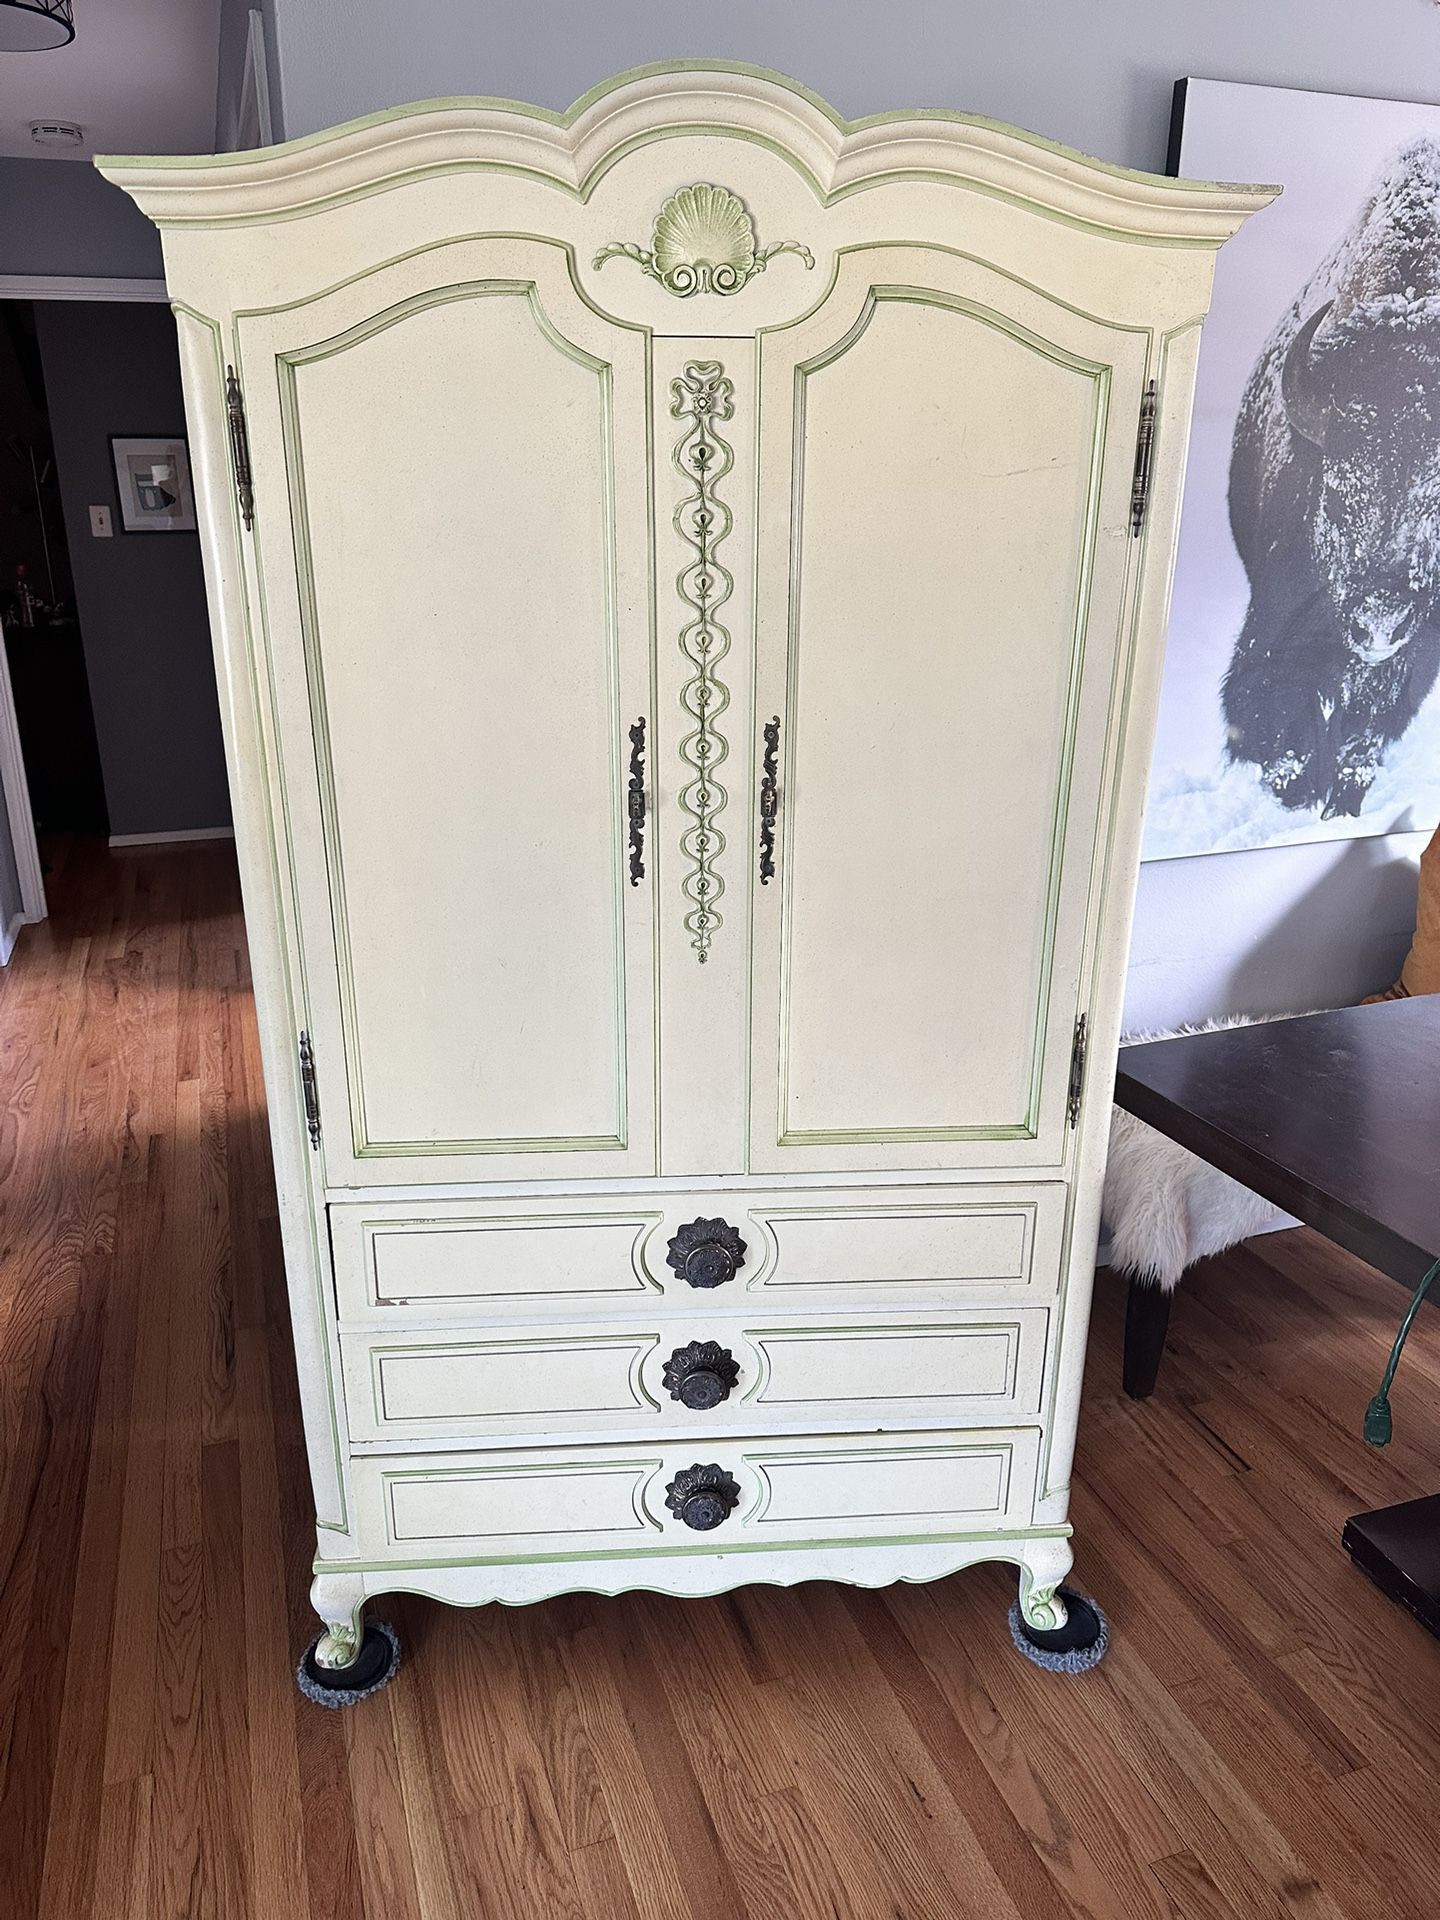 Antique Armoire For Sale. Light Beige With Green Trim 